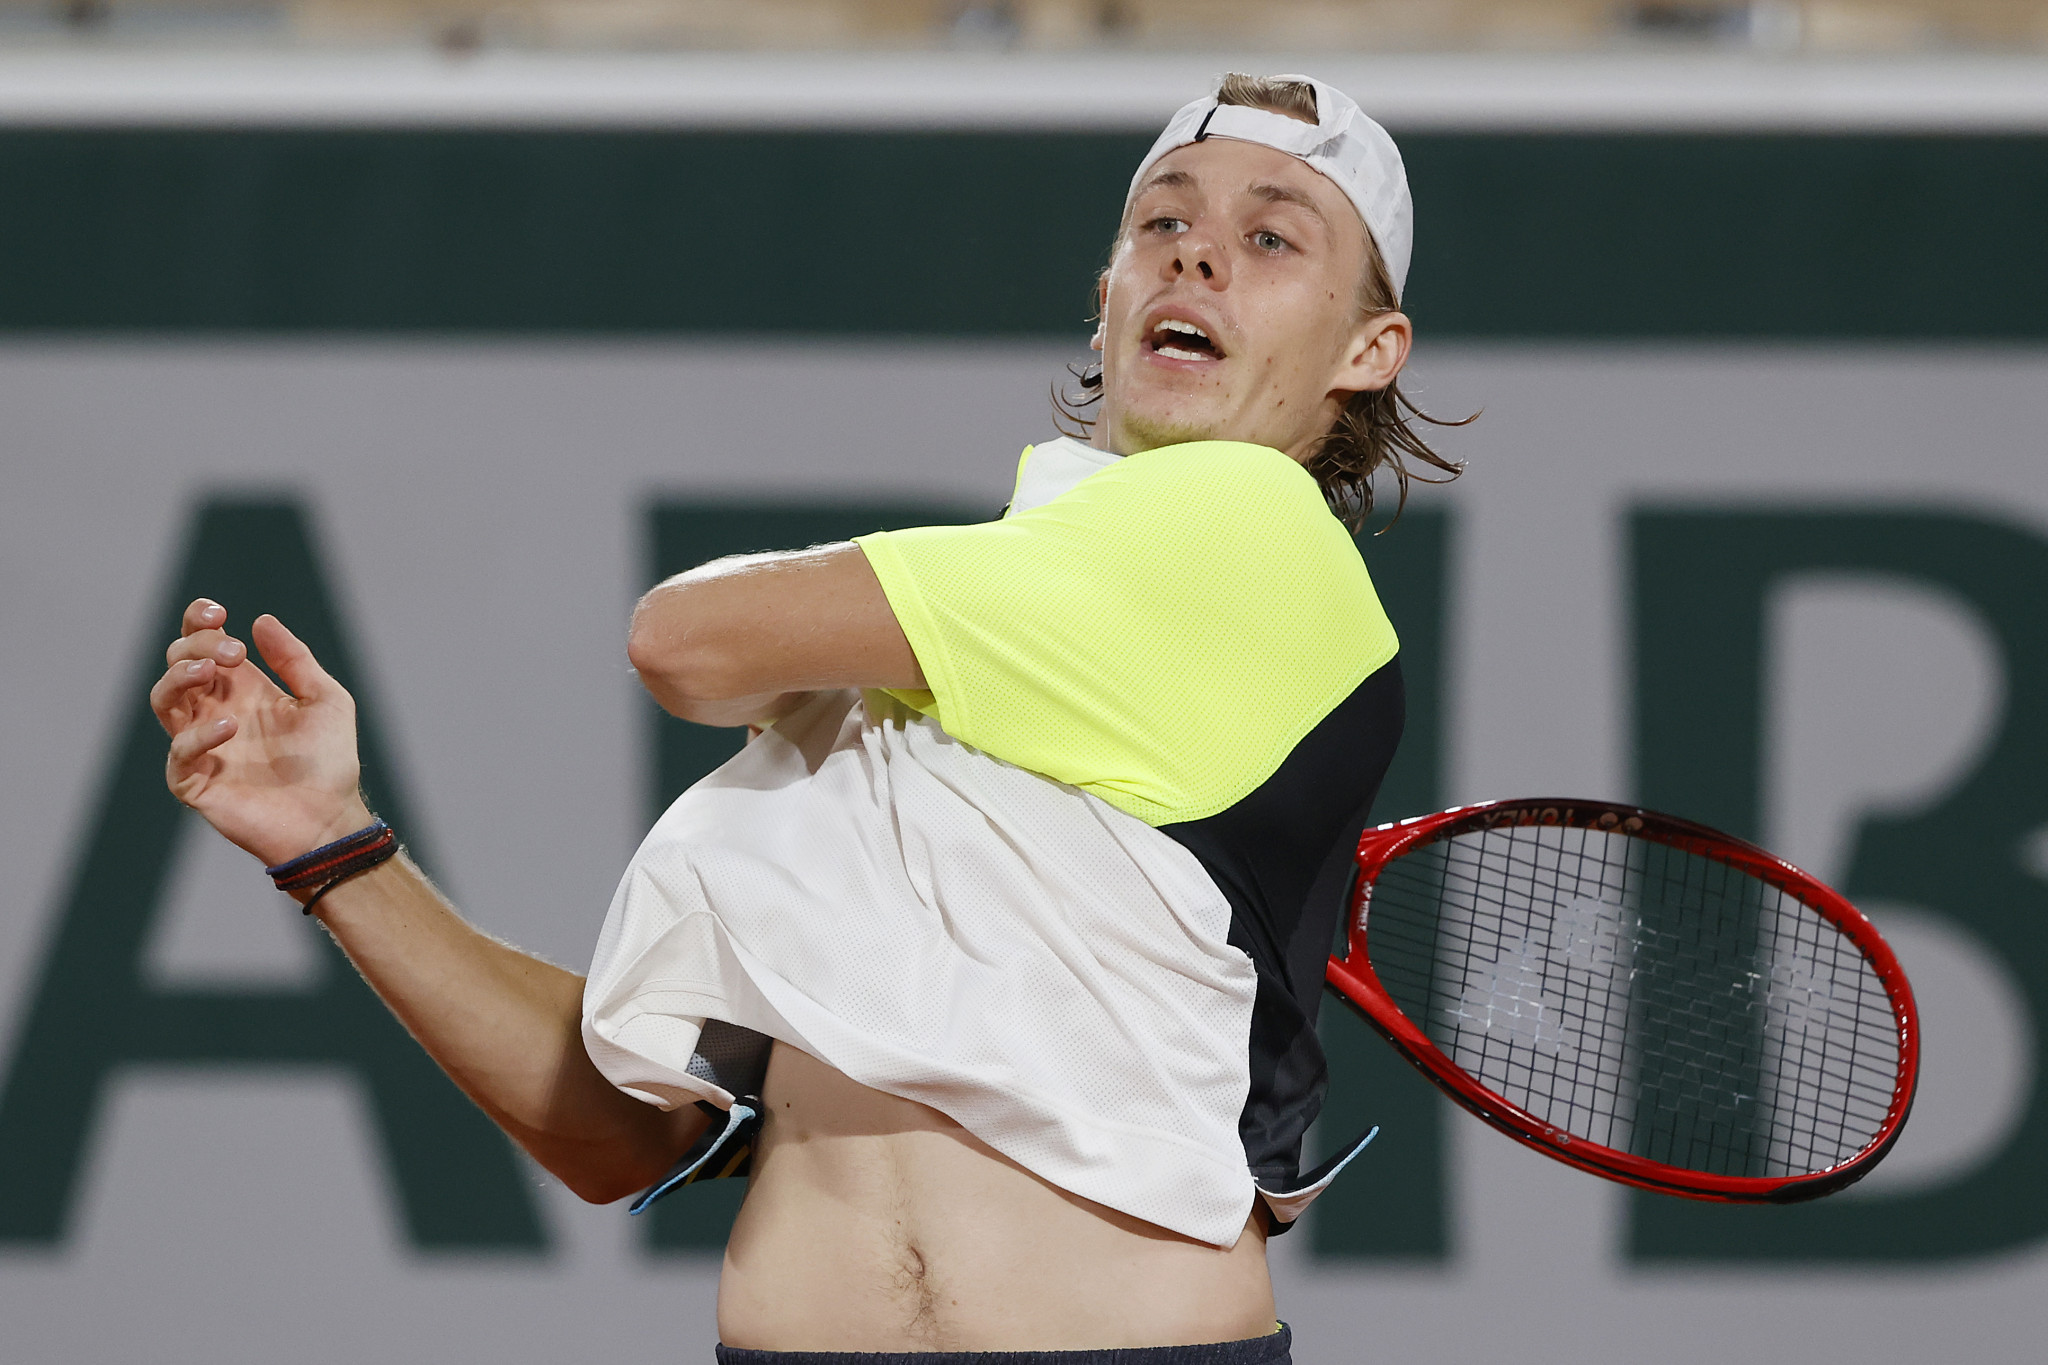 Ninth seed Denis Shapovalov beat France's Gilles Simon in the most competitive match of the day on the main Philippe Chatrier court ©Getty Images